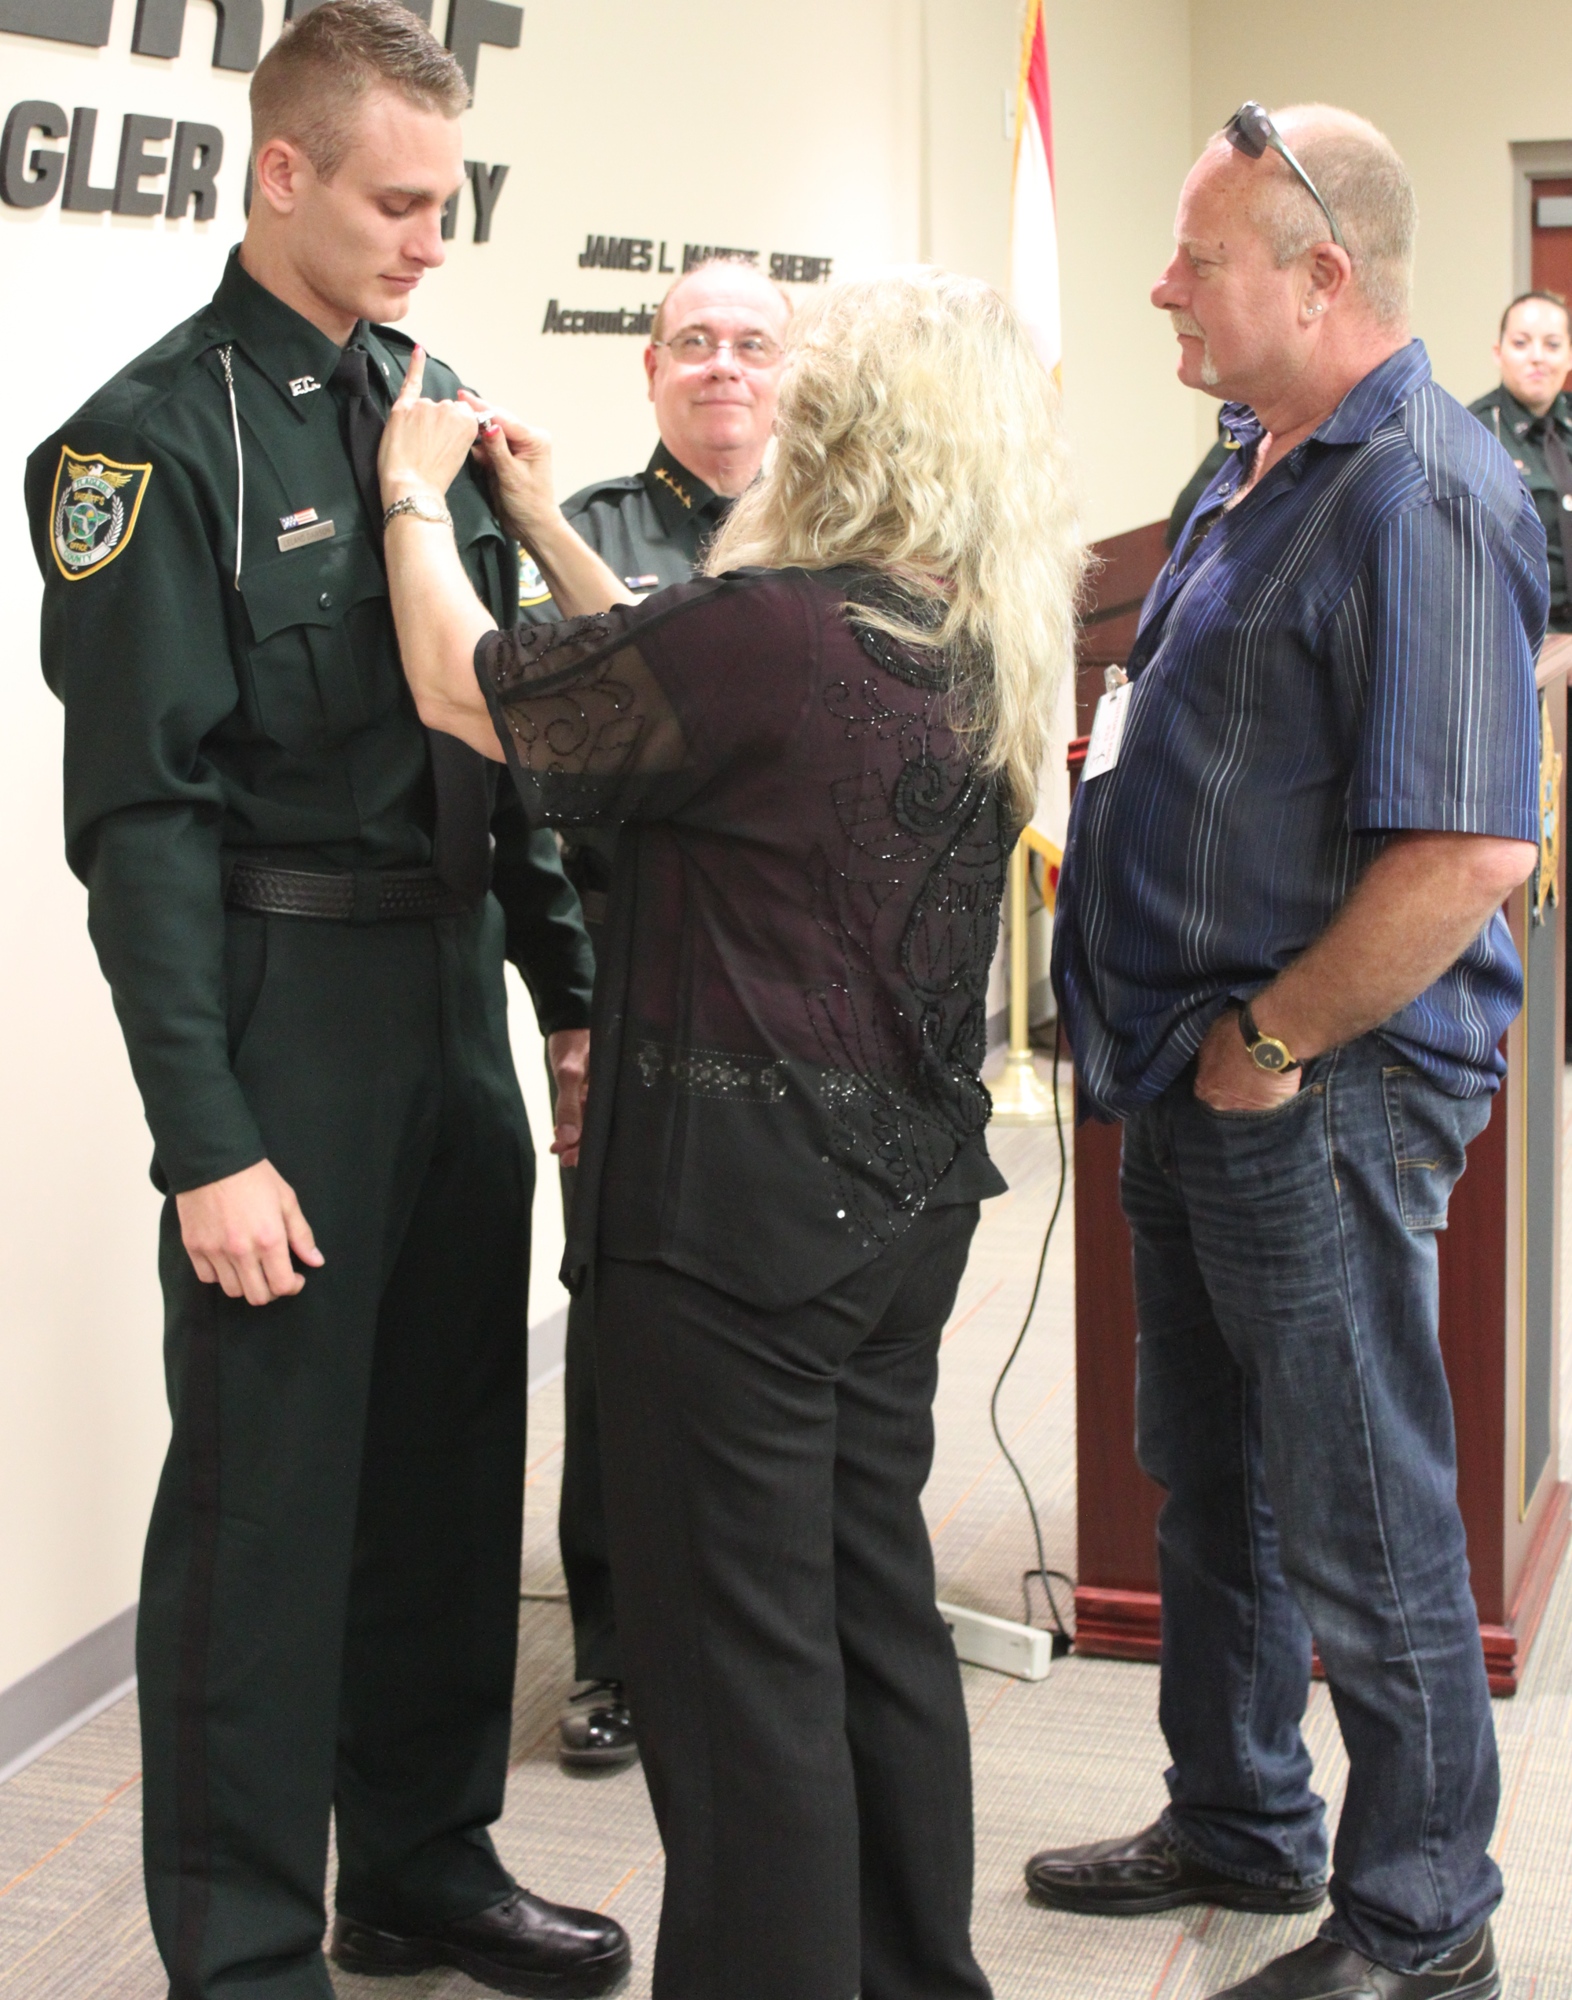 Deputy Leland Dawson's parents, Toni Dawson and Leland V. Dawson, attended his swearing-in ceremony March 2 at the Sheriff’s Operations Center. (Photo courtesy of the Flagler County Sheriff's Office)